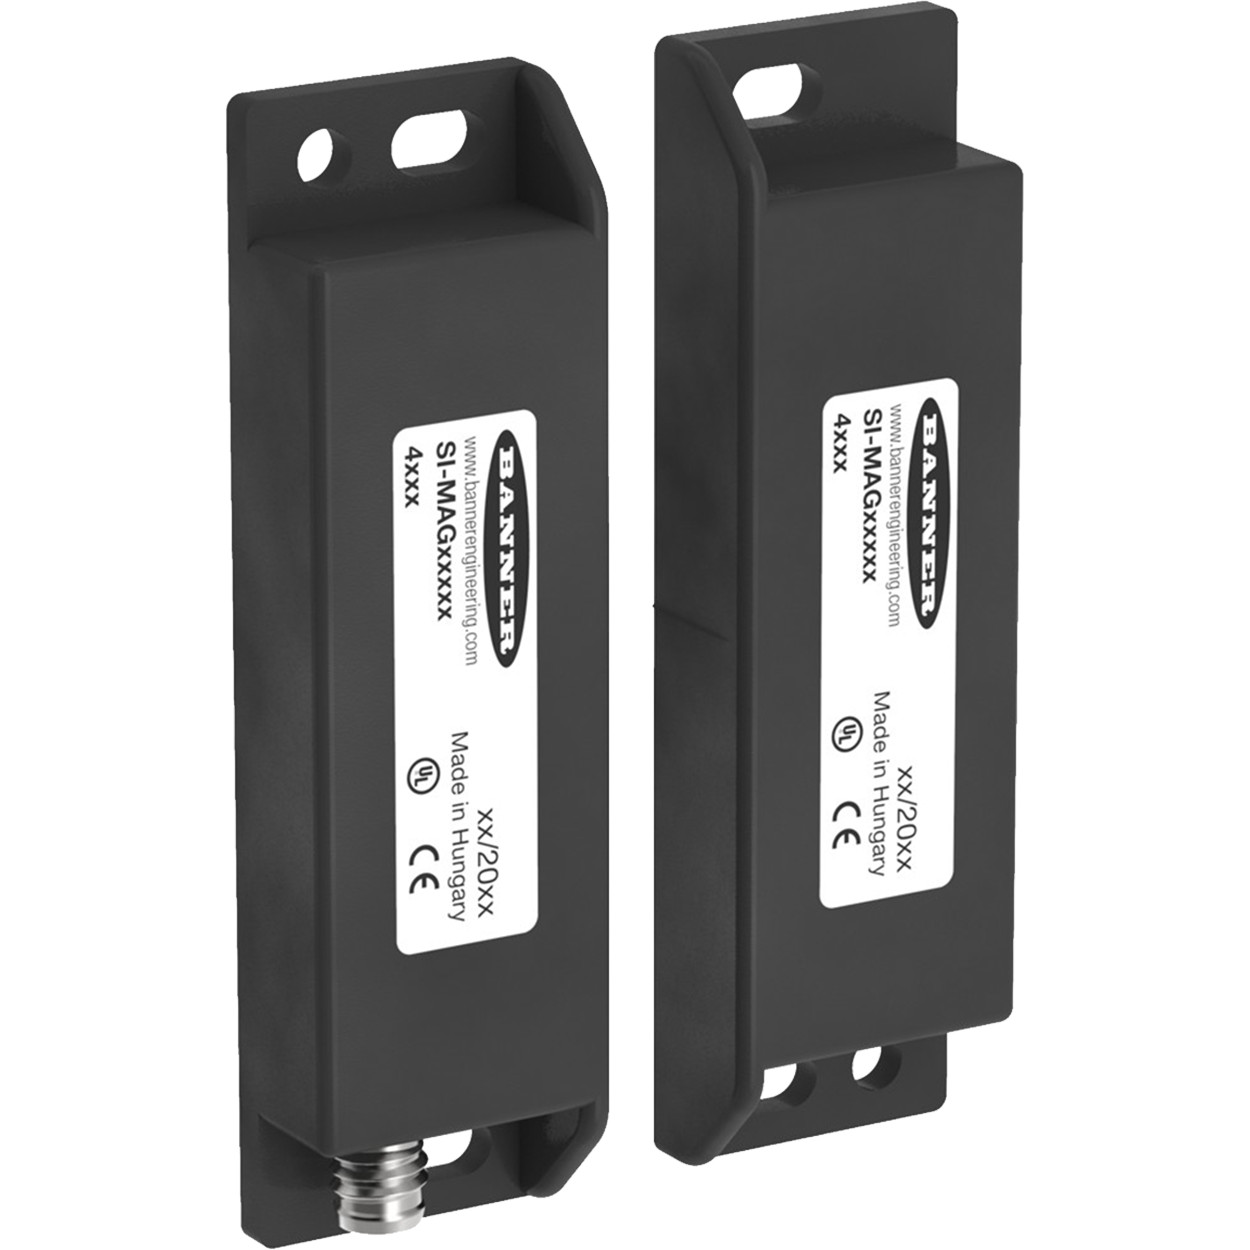 BANNER SI-MAG SERIES MAGNETIC SAFETY SWITCHES